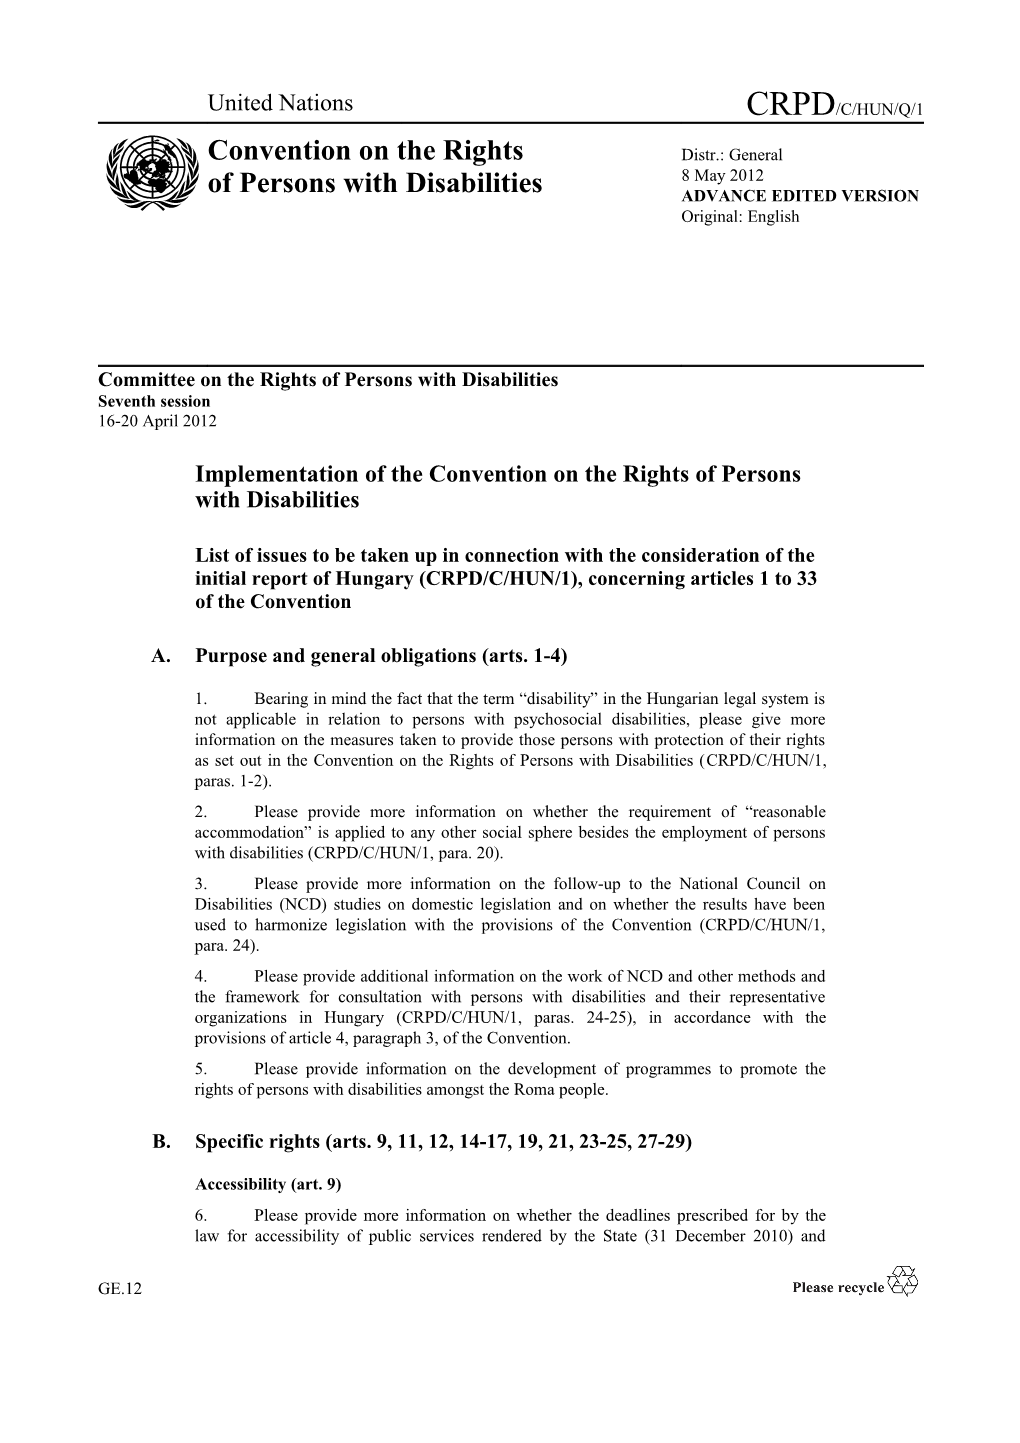 Committee on the Rights of Persons with Disabilities s3